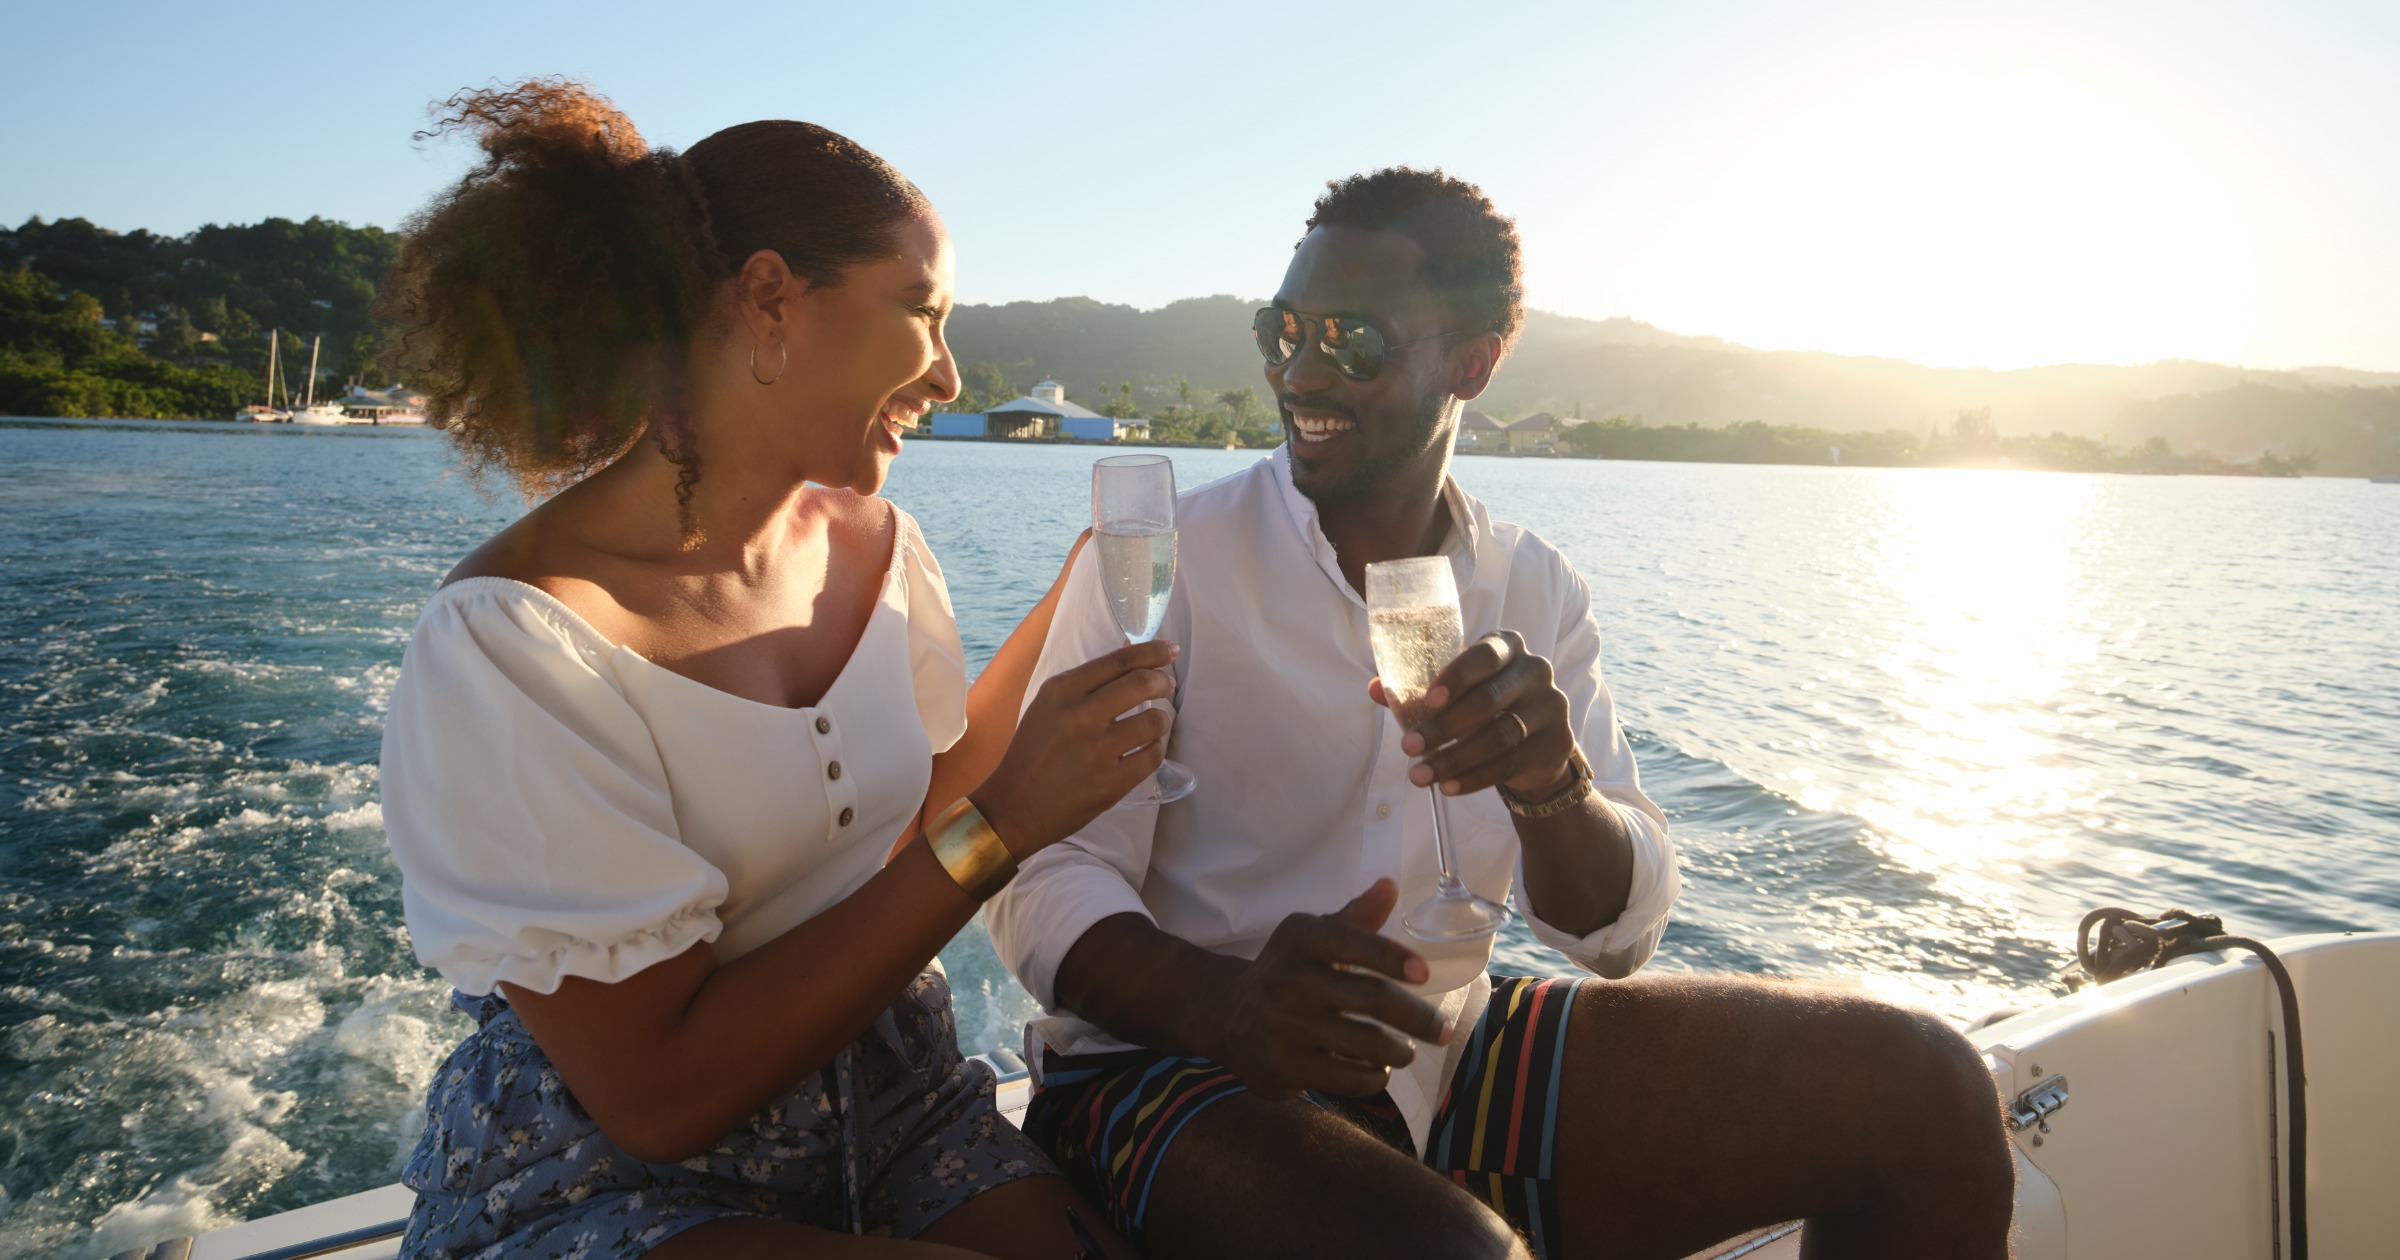 Why Jamaica Should Be Your Wedding or Honeymoon Destination